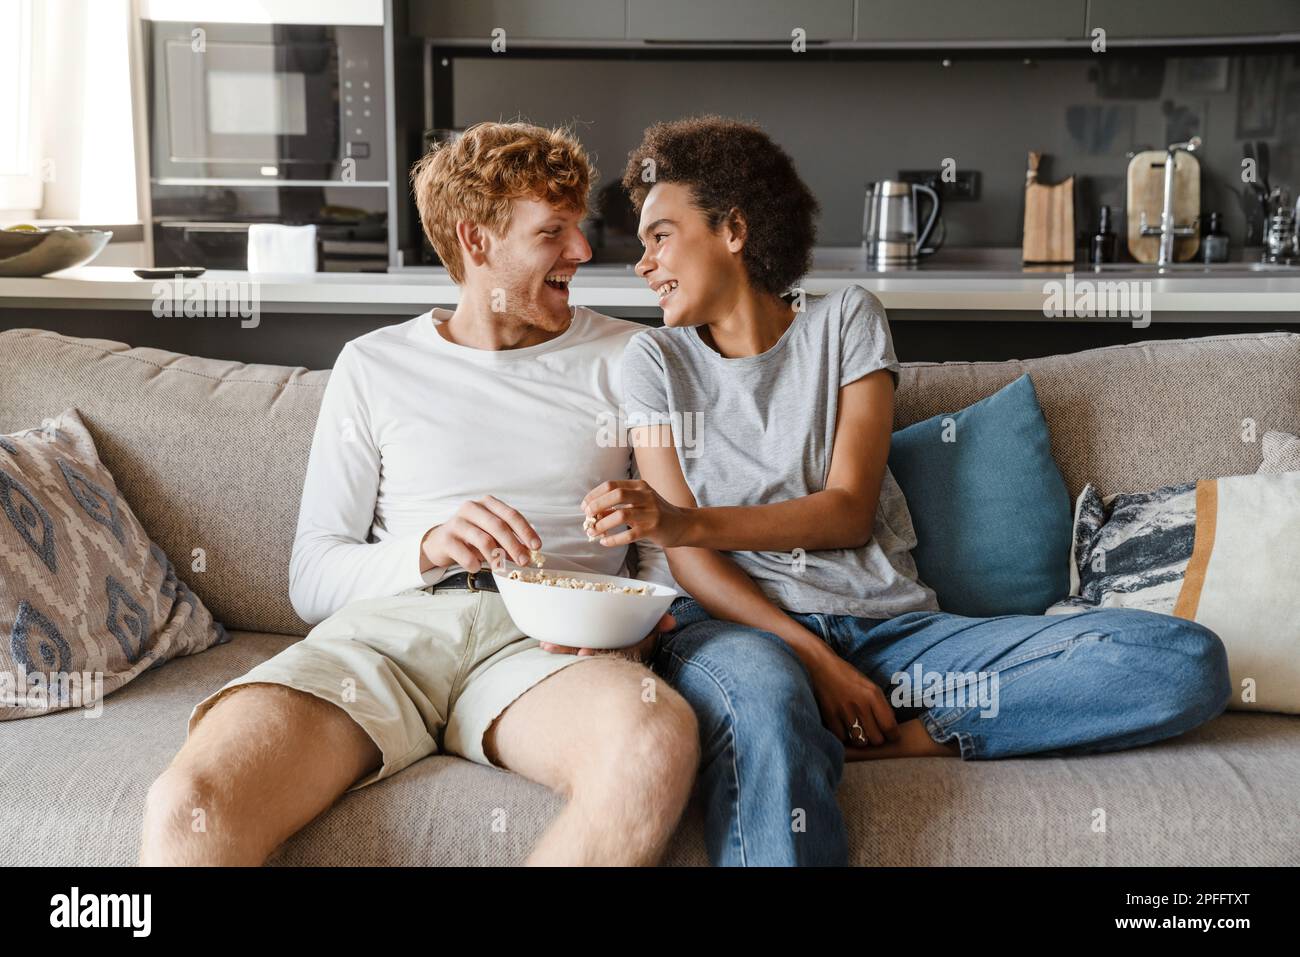 Young beautiful happy interracial couple eating popcorn and looking at each other, while sitting on couch in cozy sunny living room at home Stock Photo